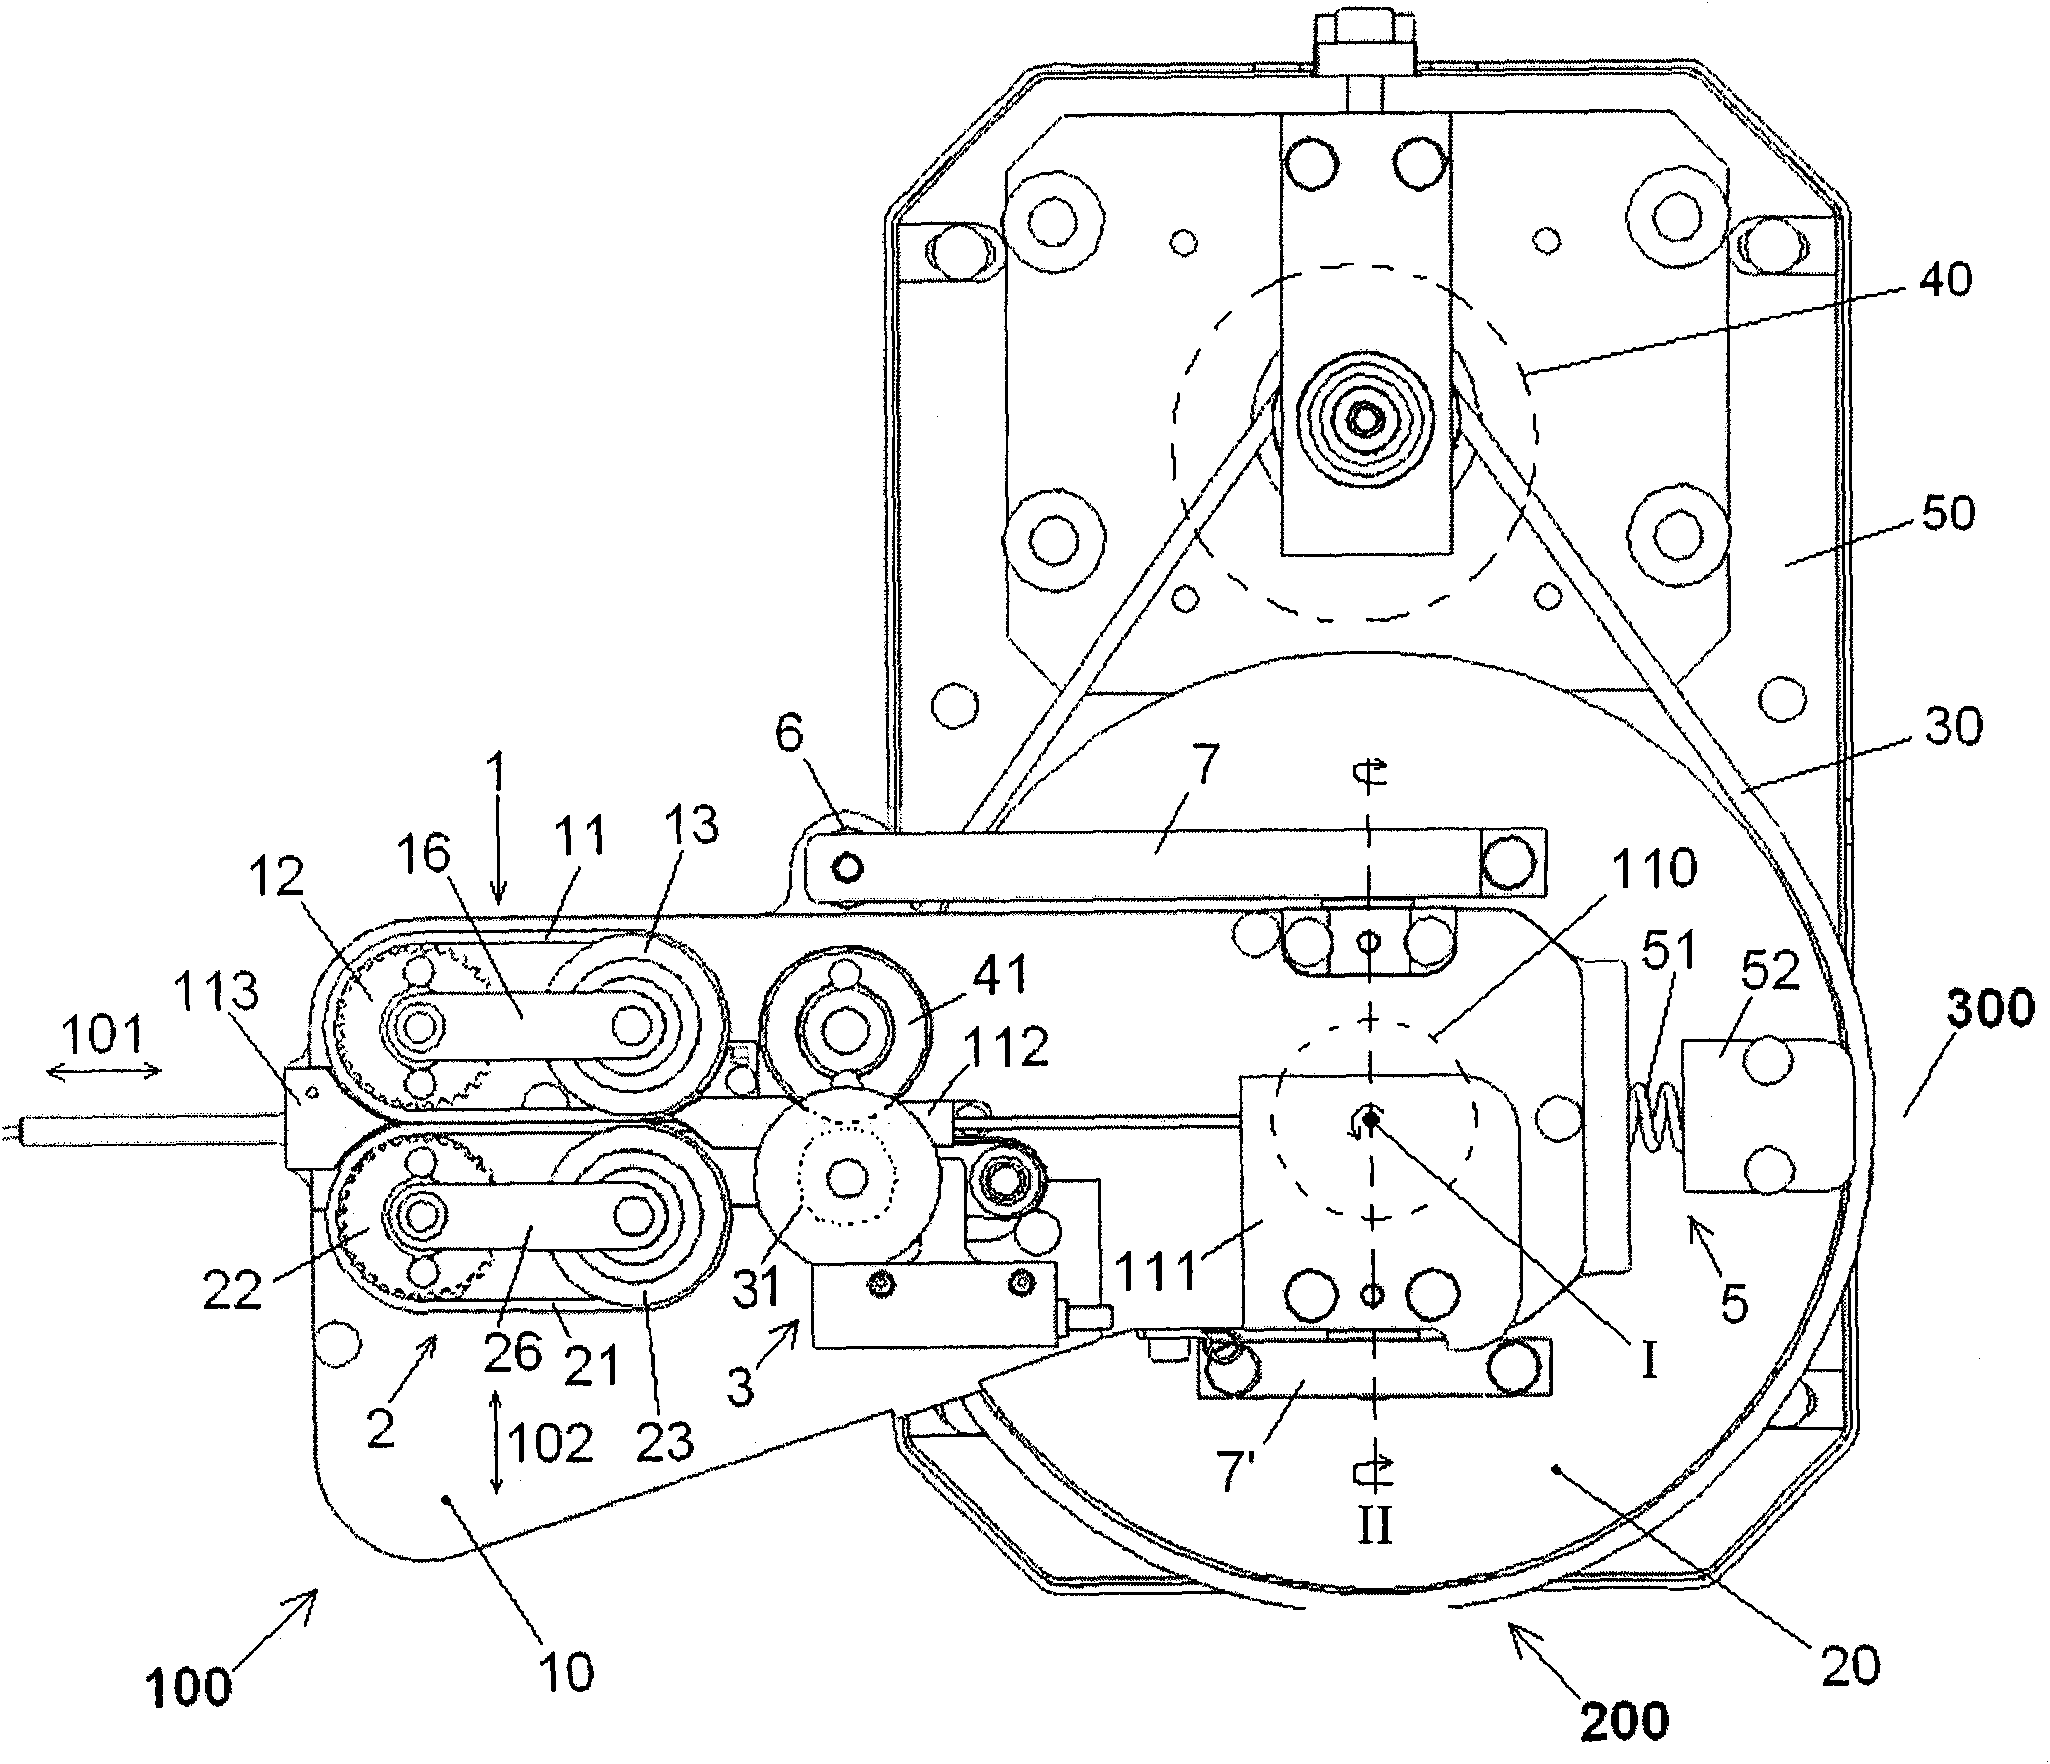 Cable supplying and rotating system